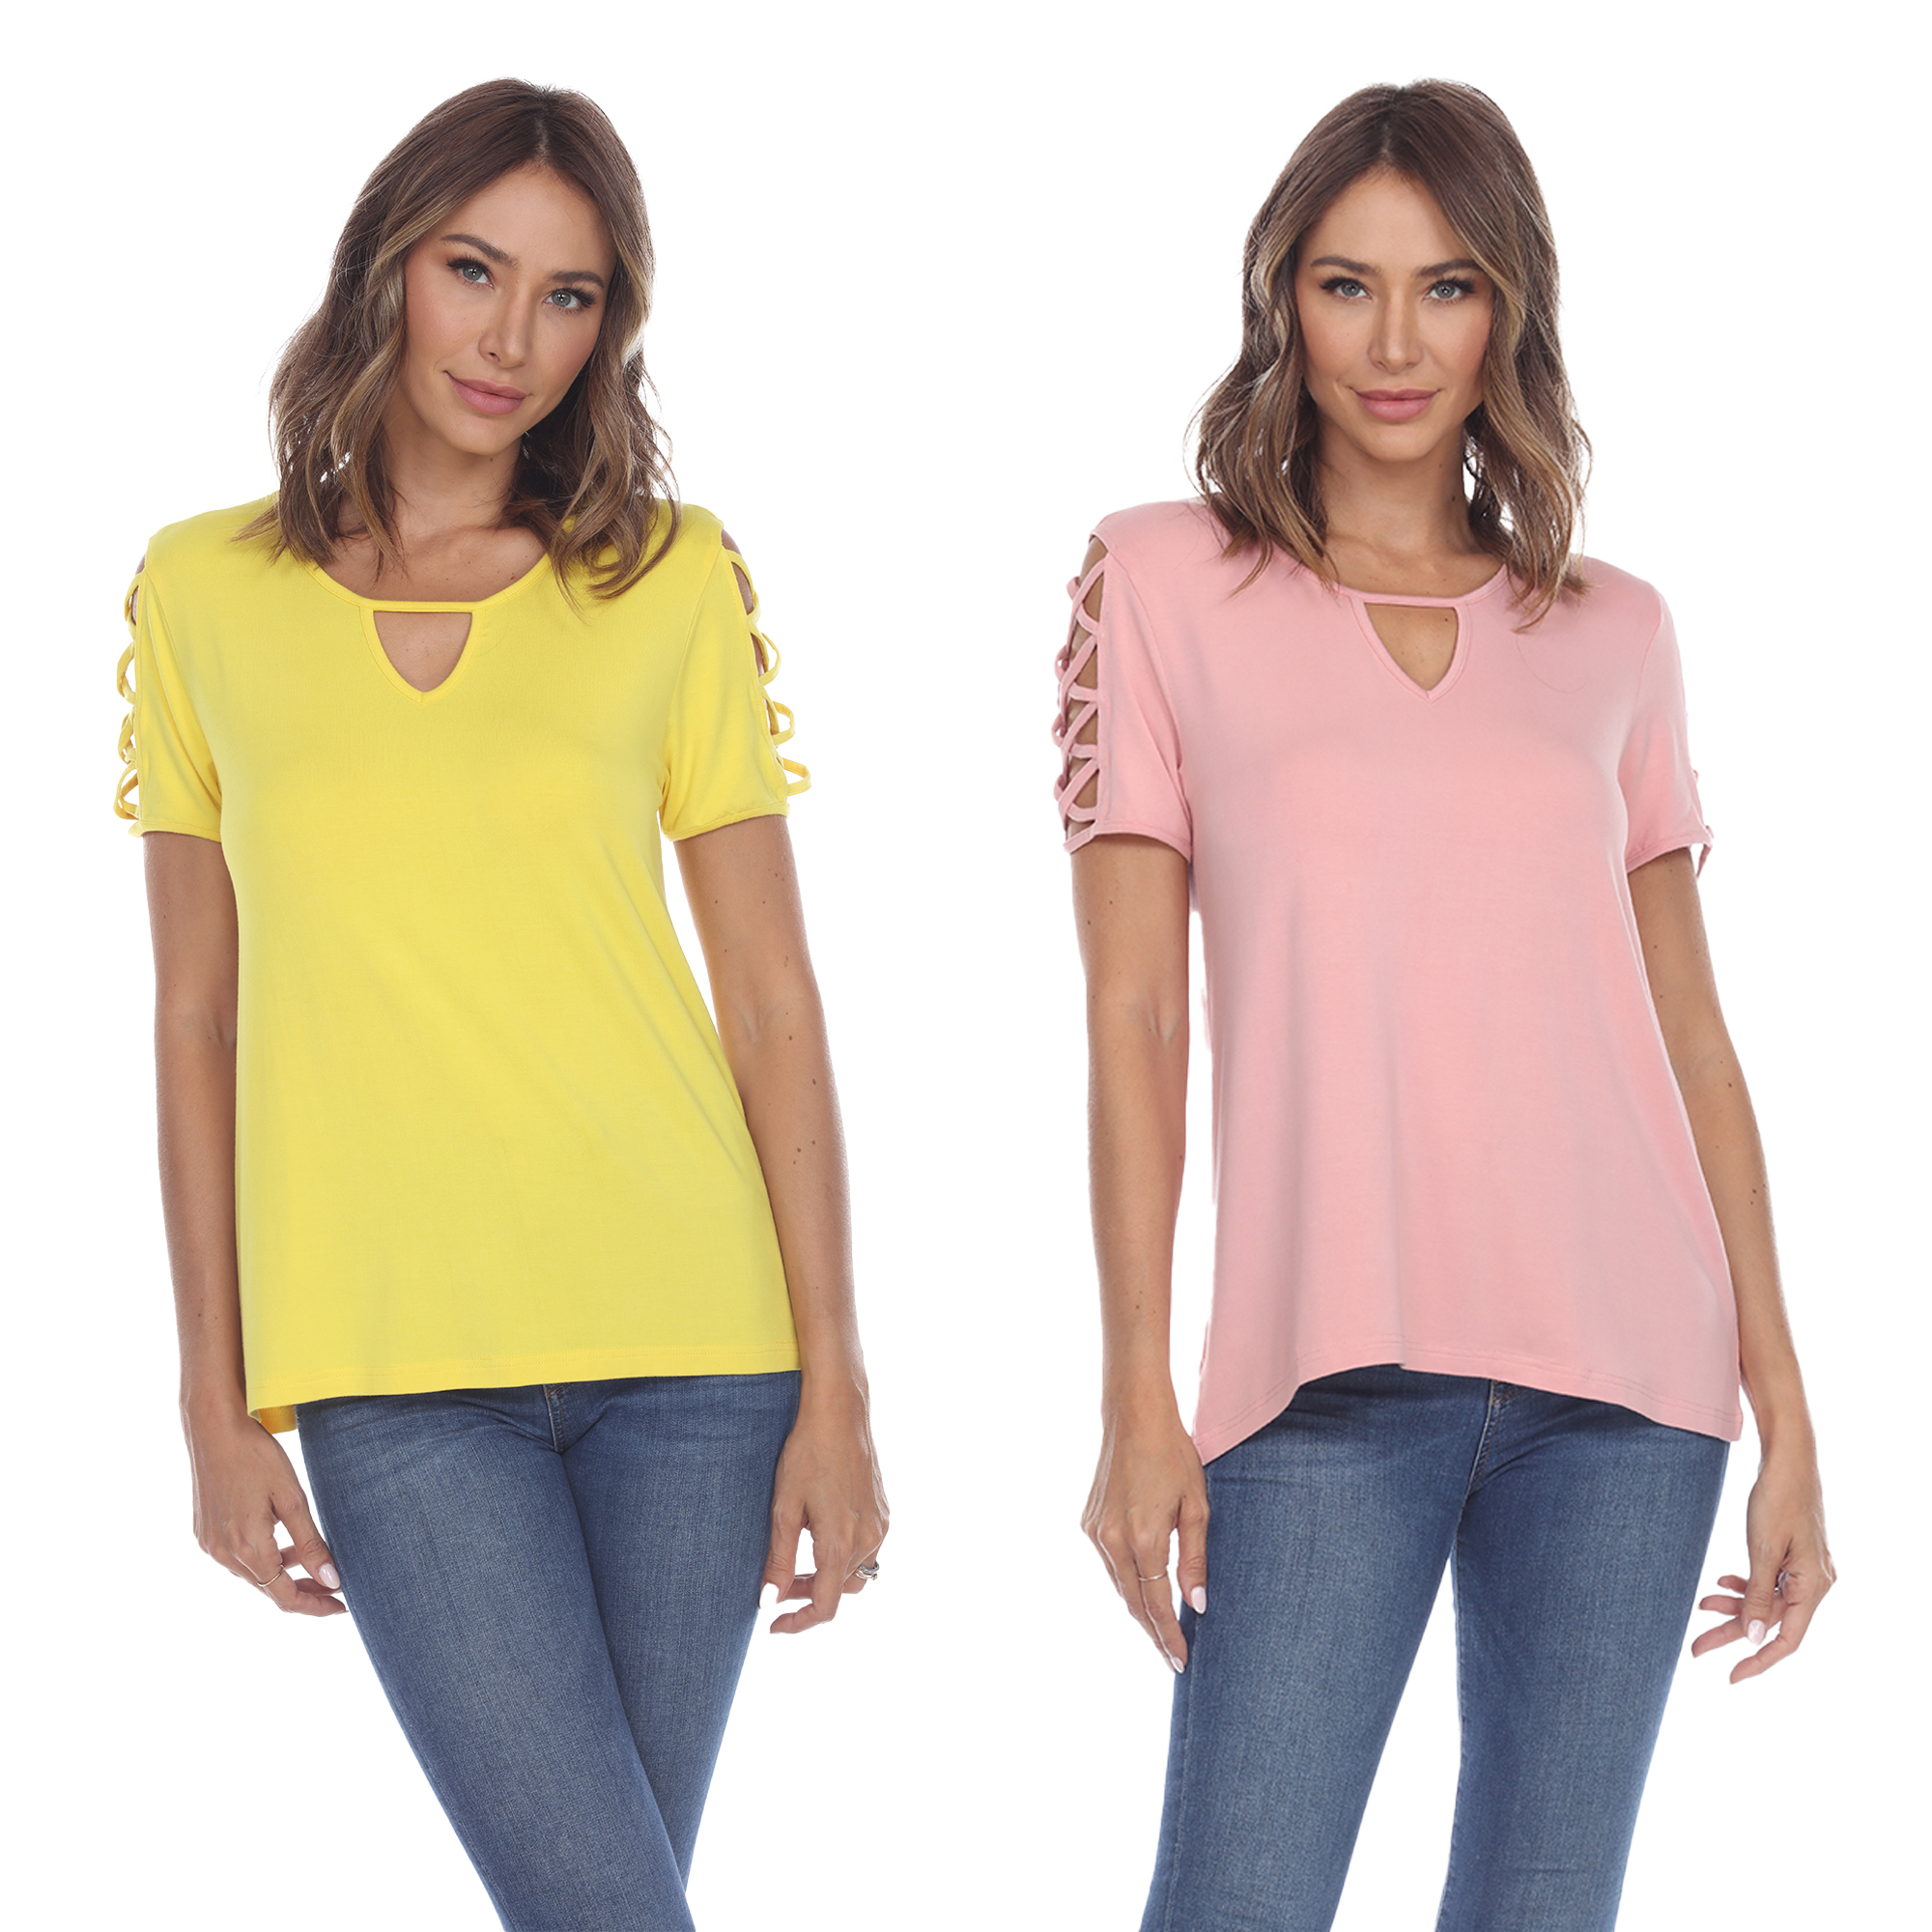 White Mark Women's Pack Of 2 Yellow Keyhole Neck Short Sleeve Top - Yellow Rose, Small